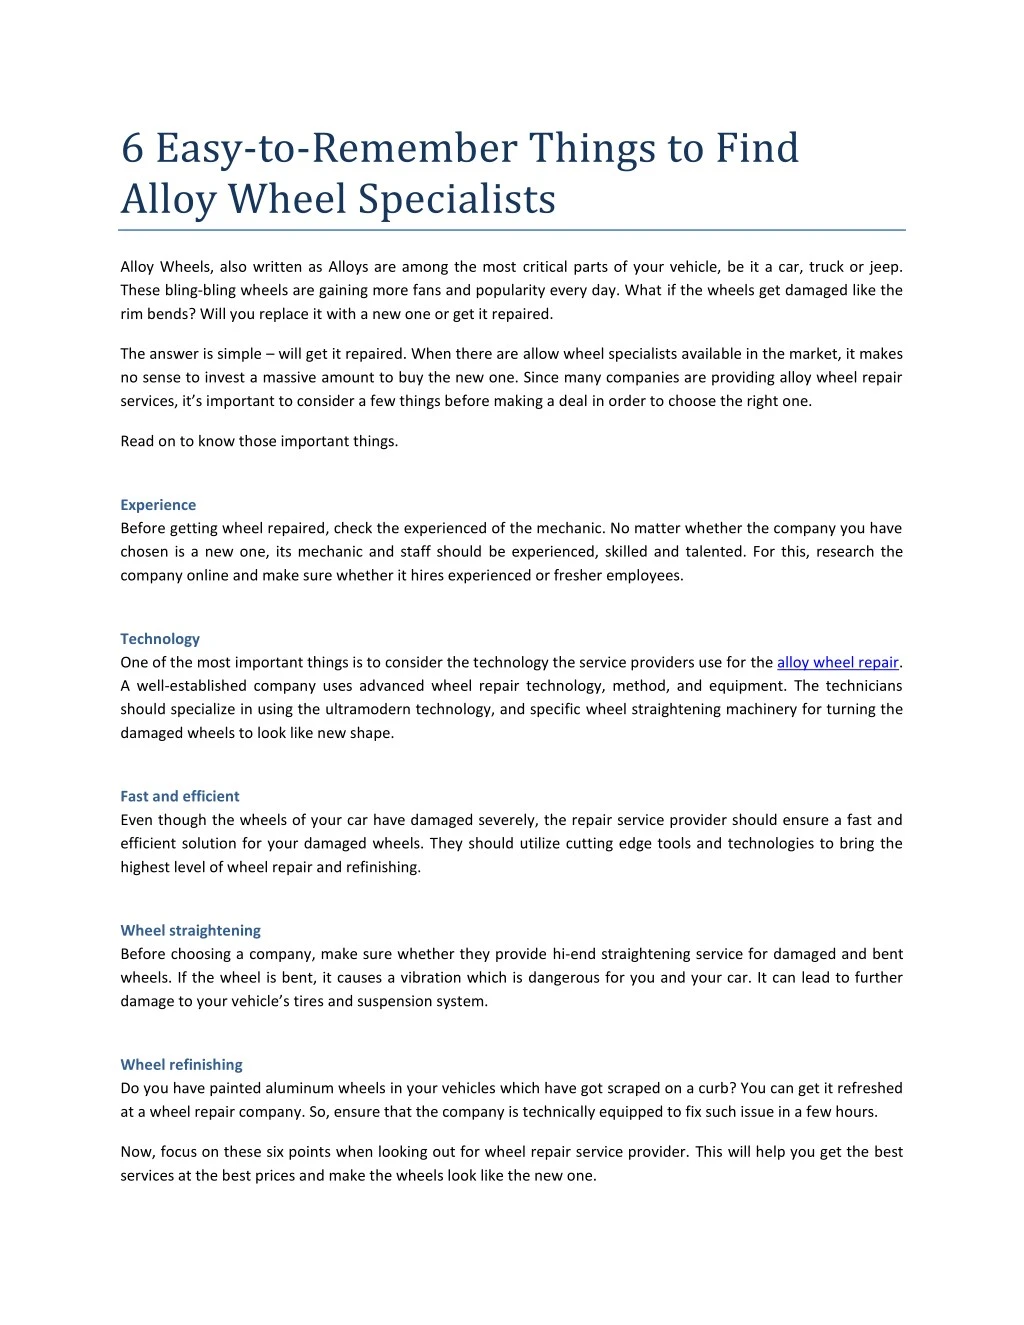 6 easy to remember things to find alloy wheel